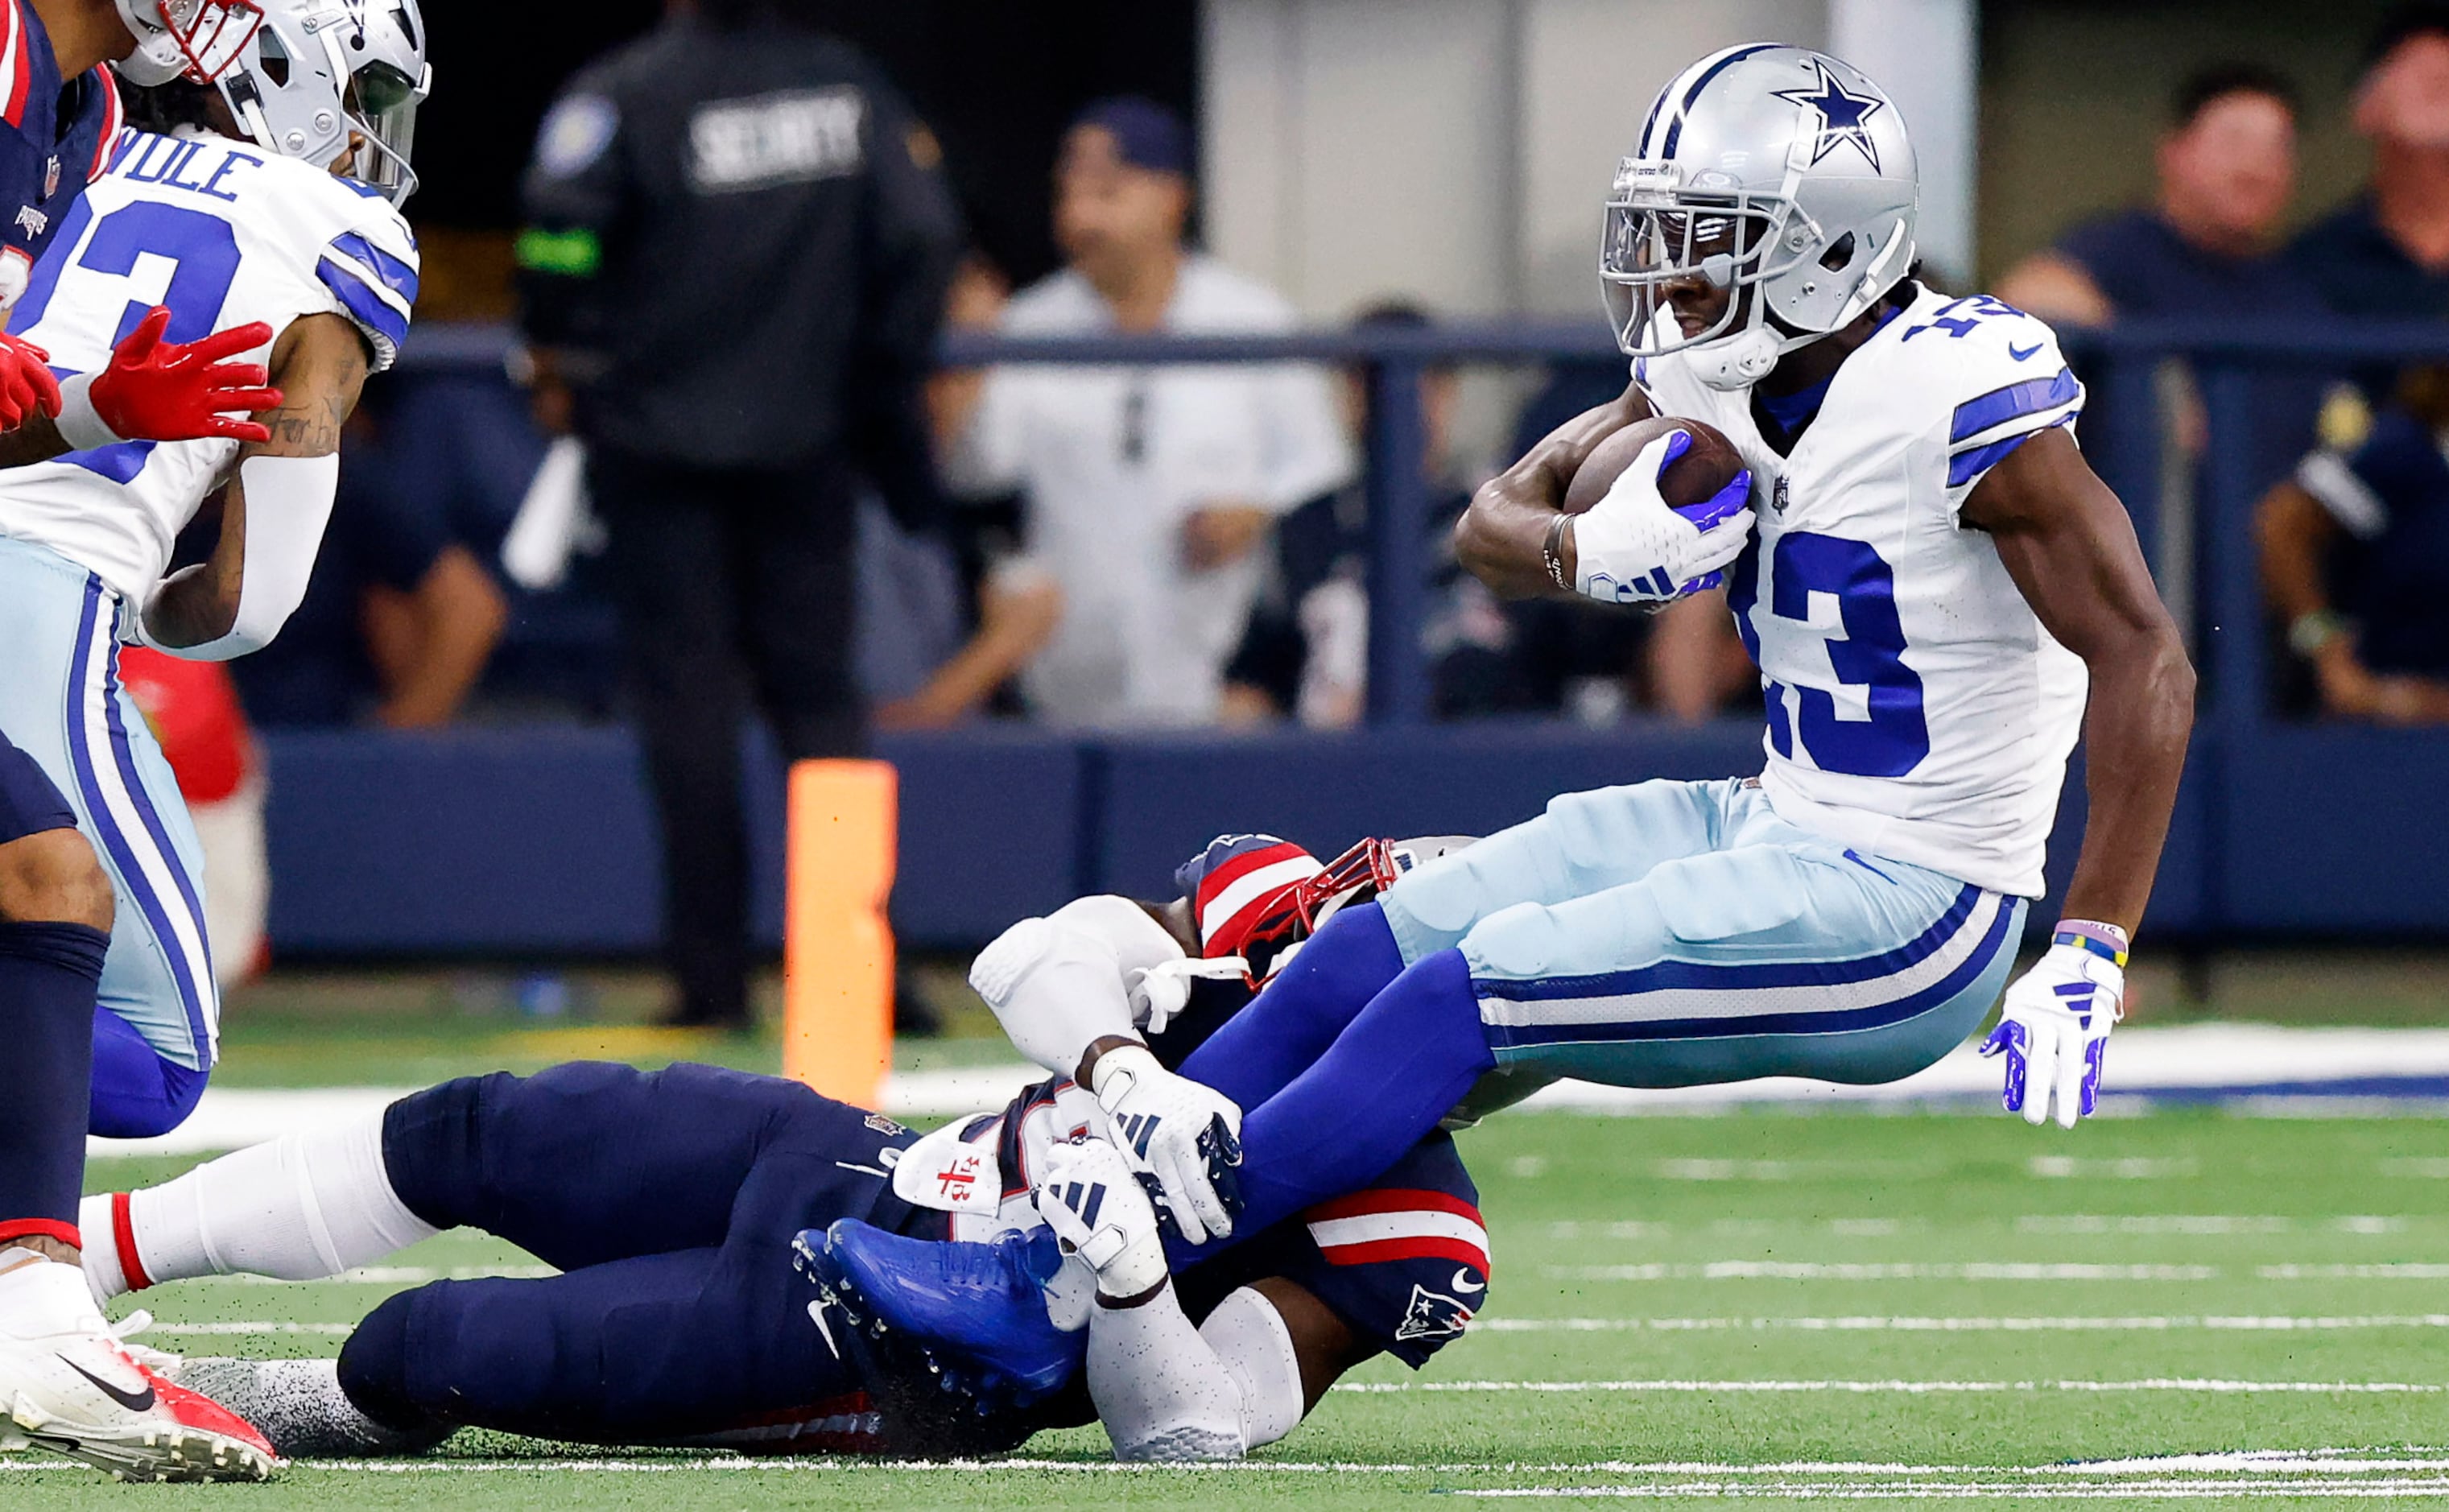 Cowboys RB Rico Dowdle to undergo MRI on hip injury after early